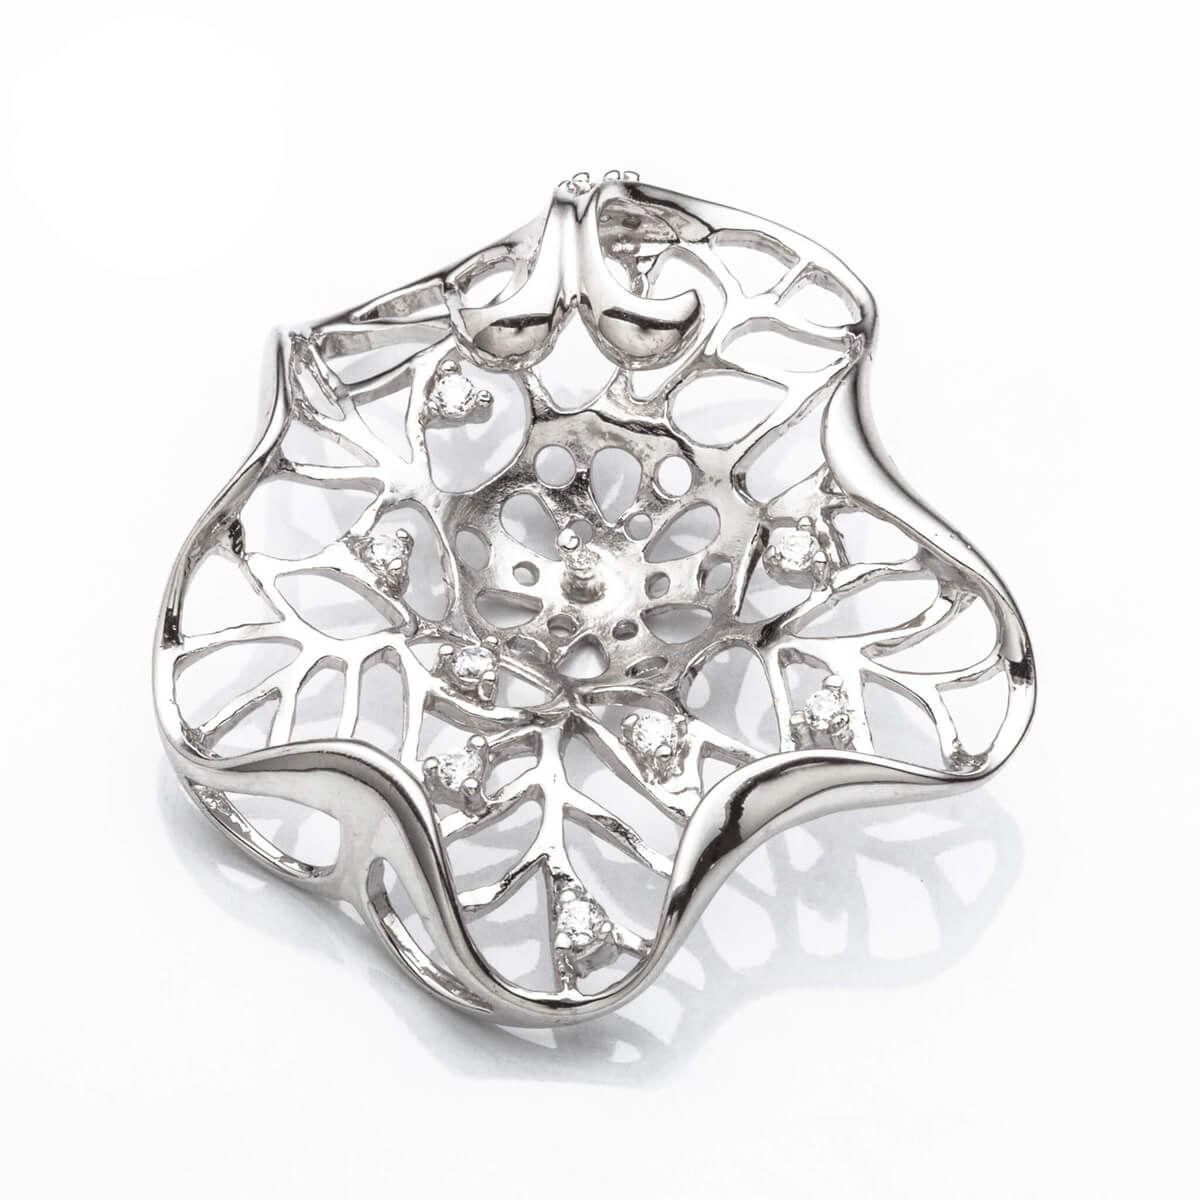 Floral Pendant with Cubic Zirconia Inlays and Cup and Peg Mounting in Sterling Silver 10mm